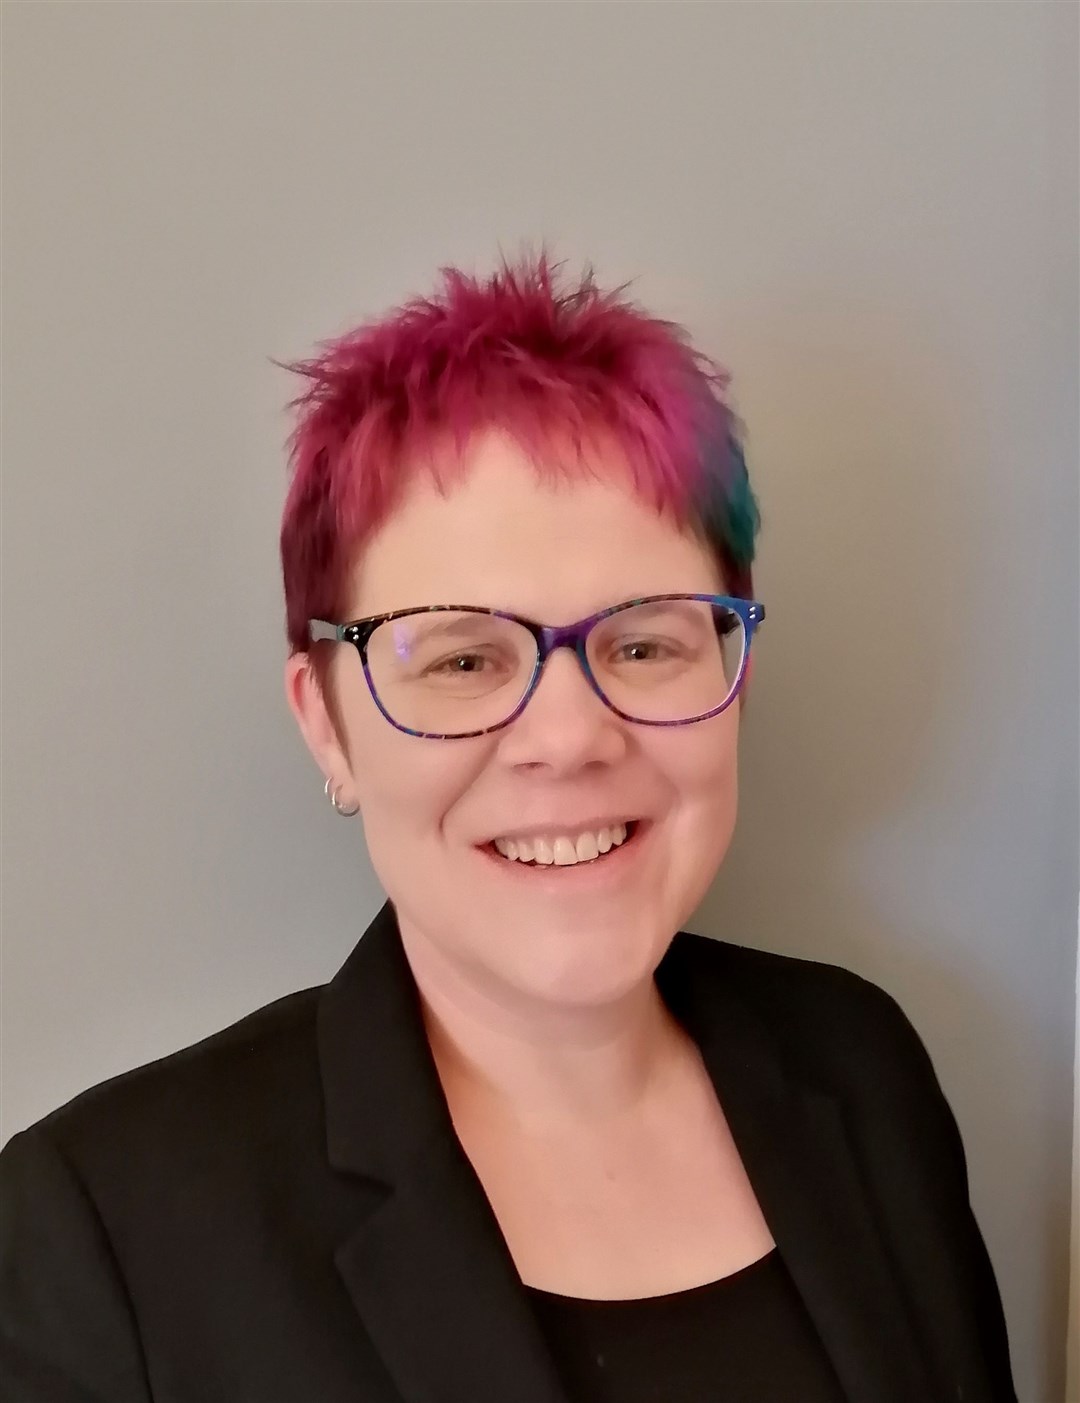 Clare Morrison: 'I am delighted to be joining Healthcare Improvement Scotland, as it is an organisation which can make a real difference to improving the lives of people across Scotland'.